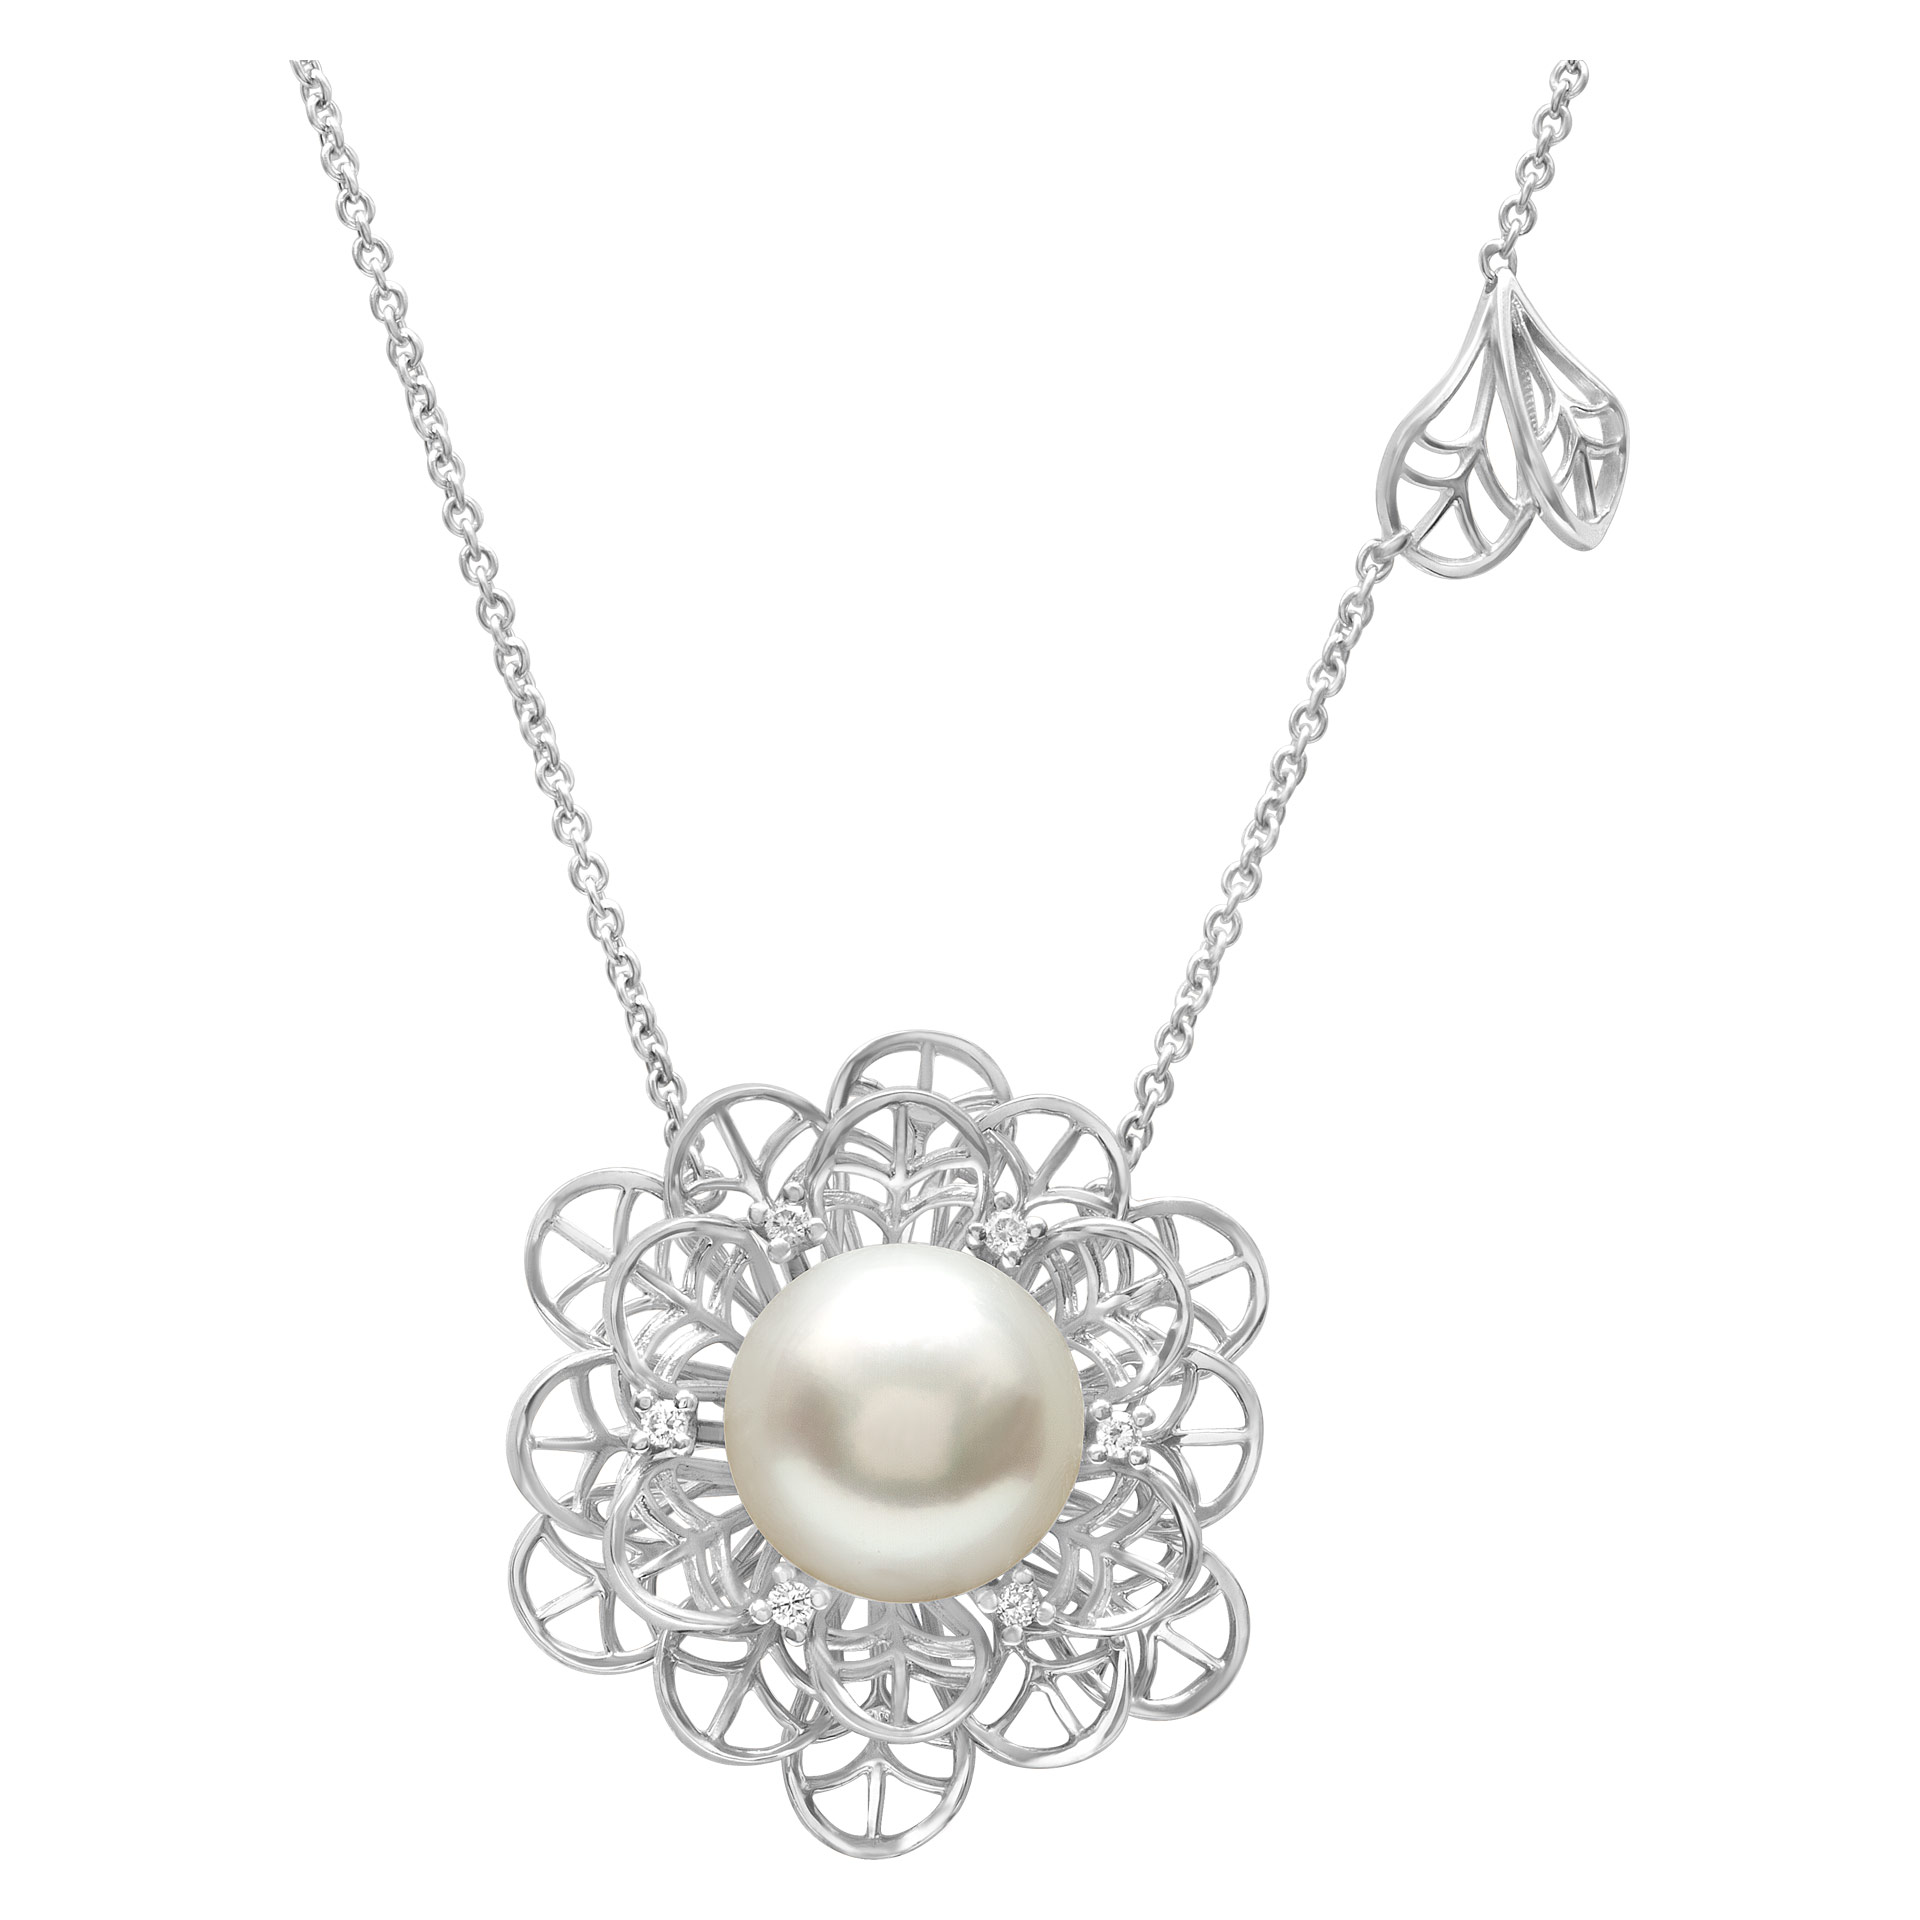 Big flower style 11.8mm South Sea Pearl necklace with diamond accents in 18k white gold